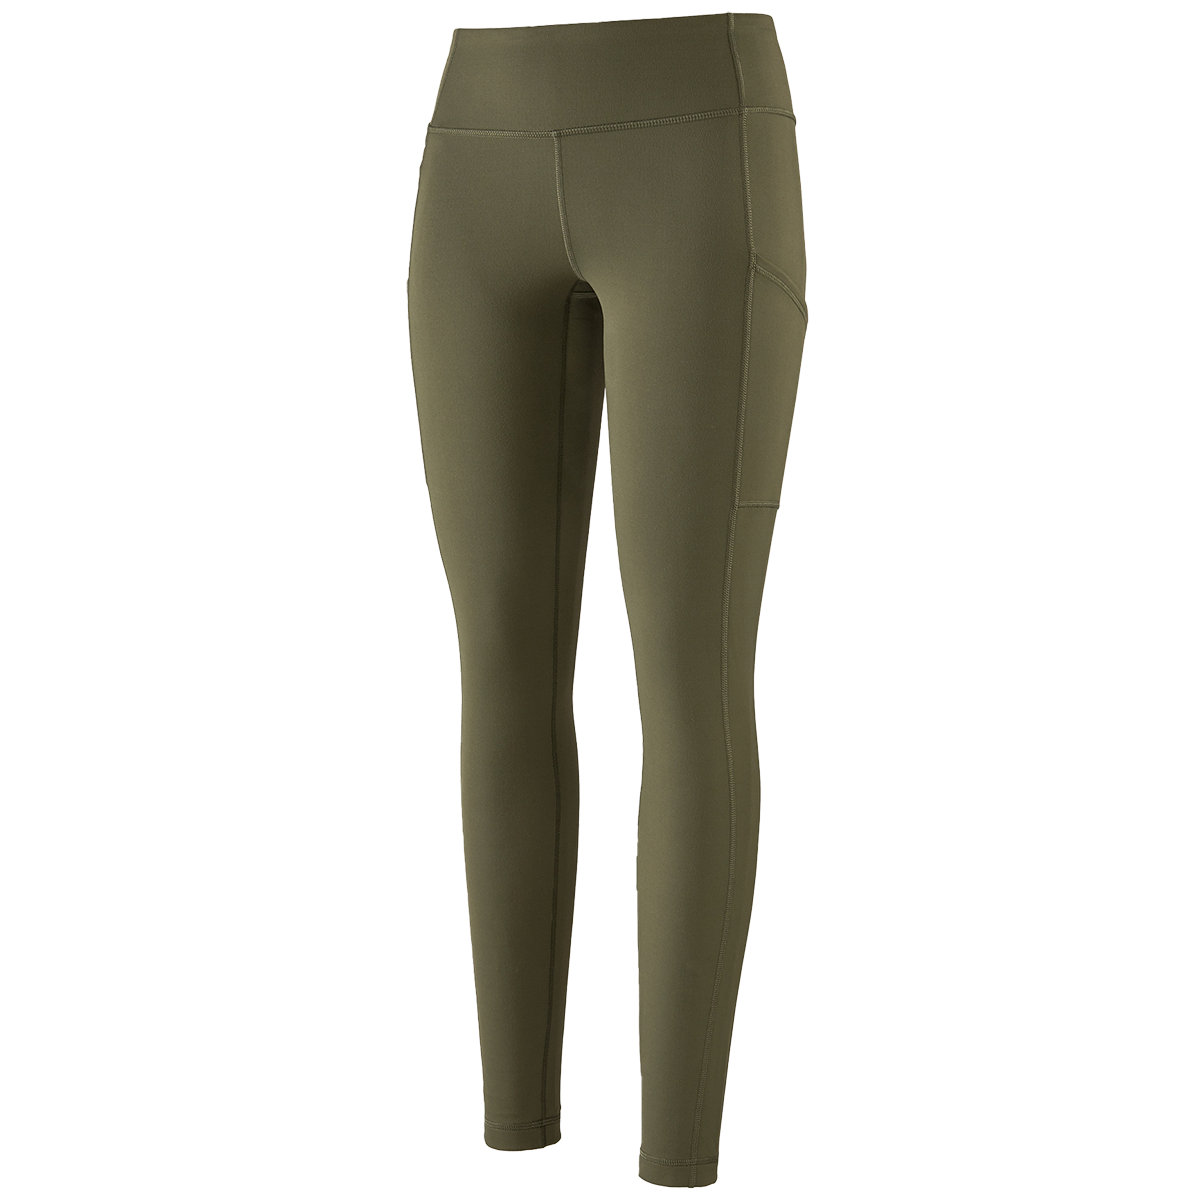 Women's Pack Out Tights alternate view